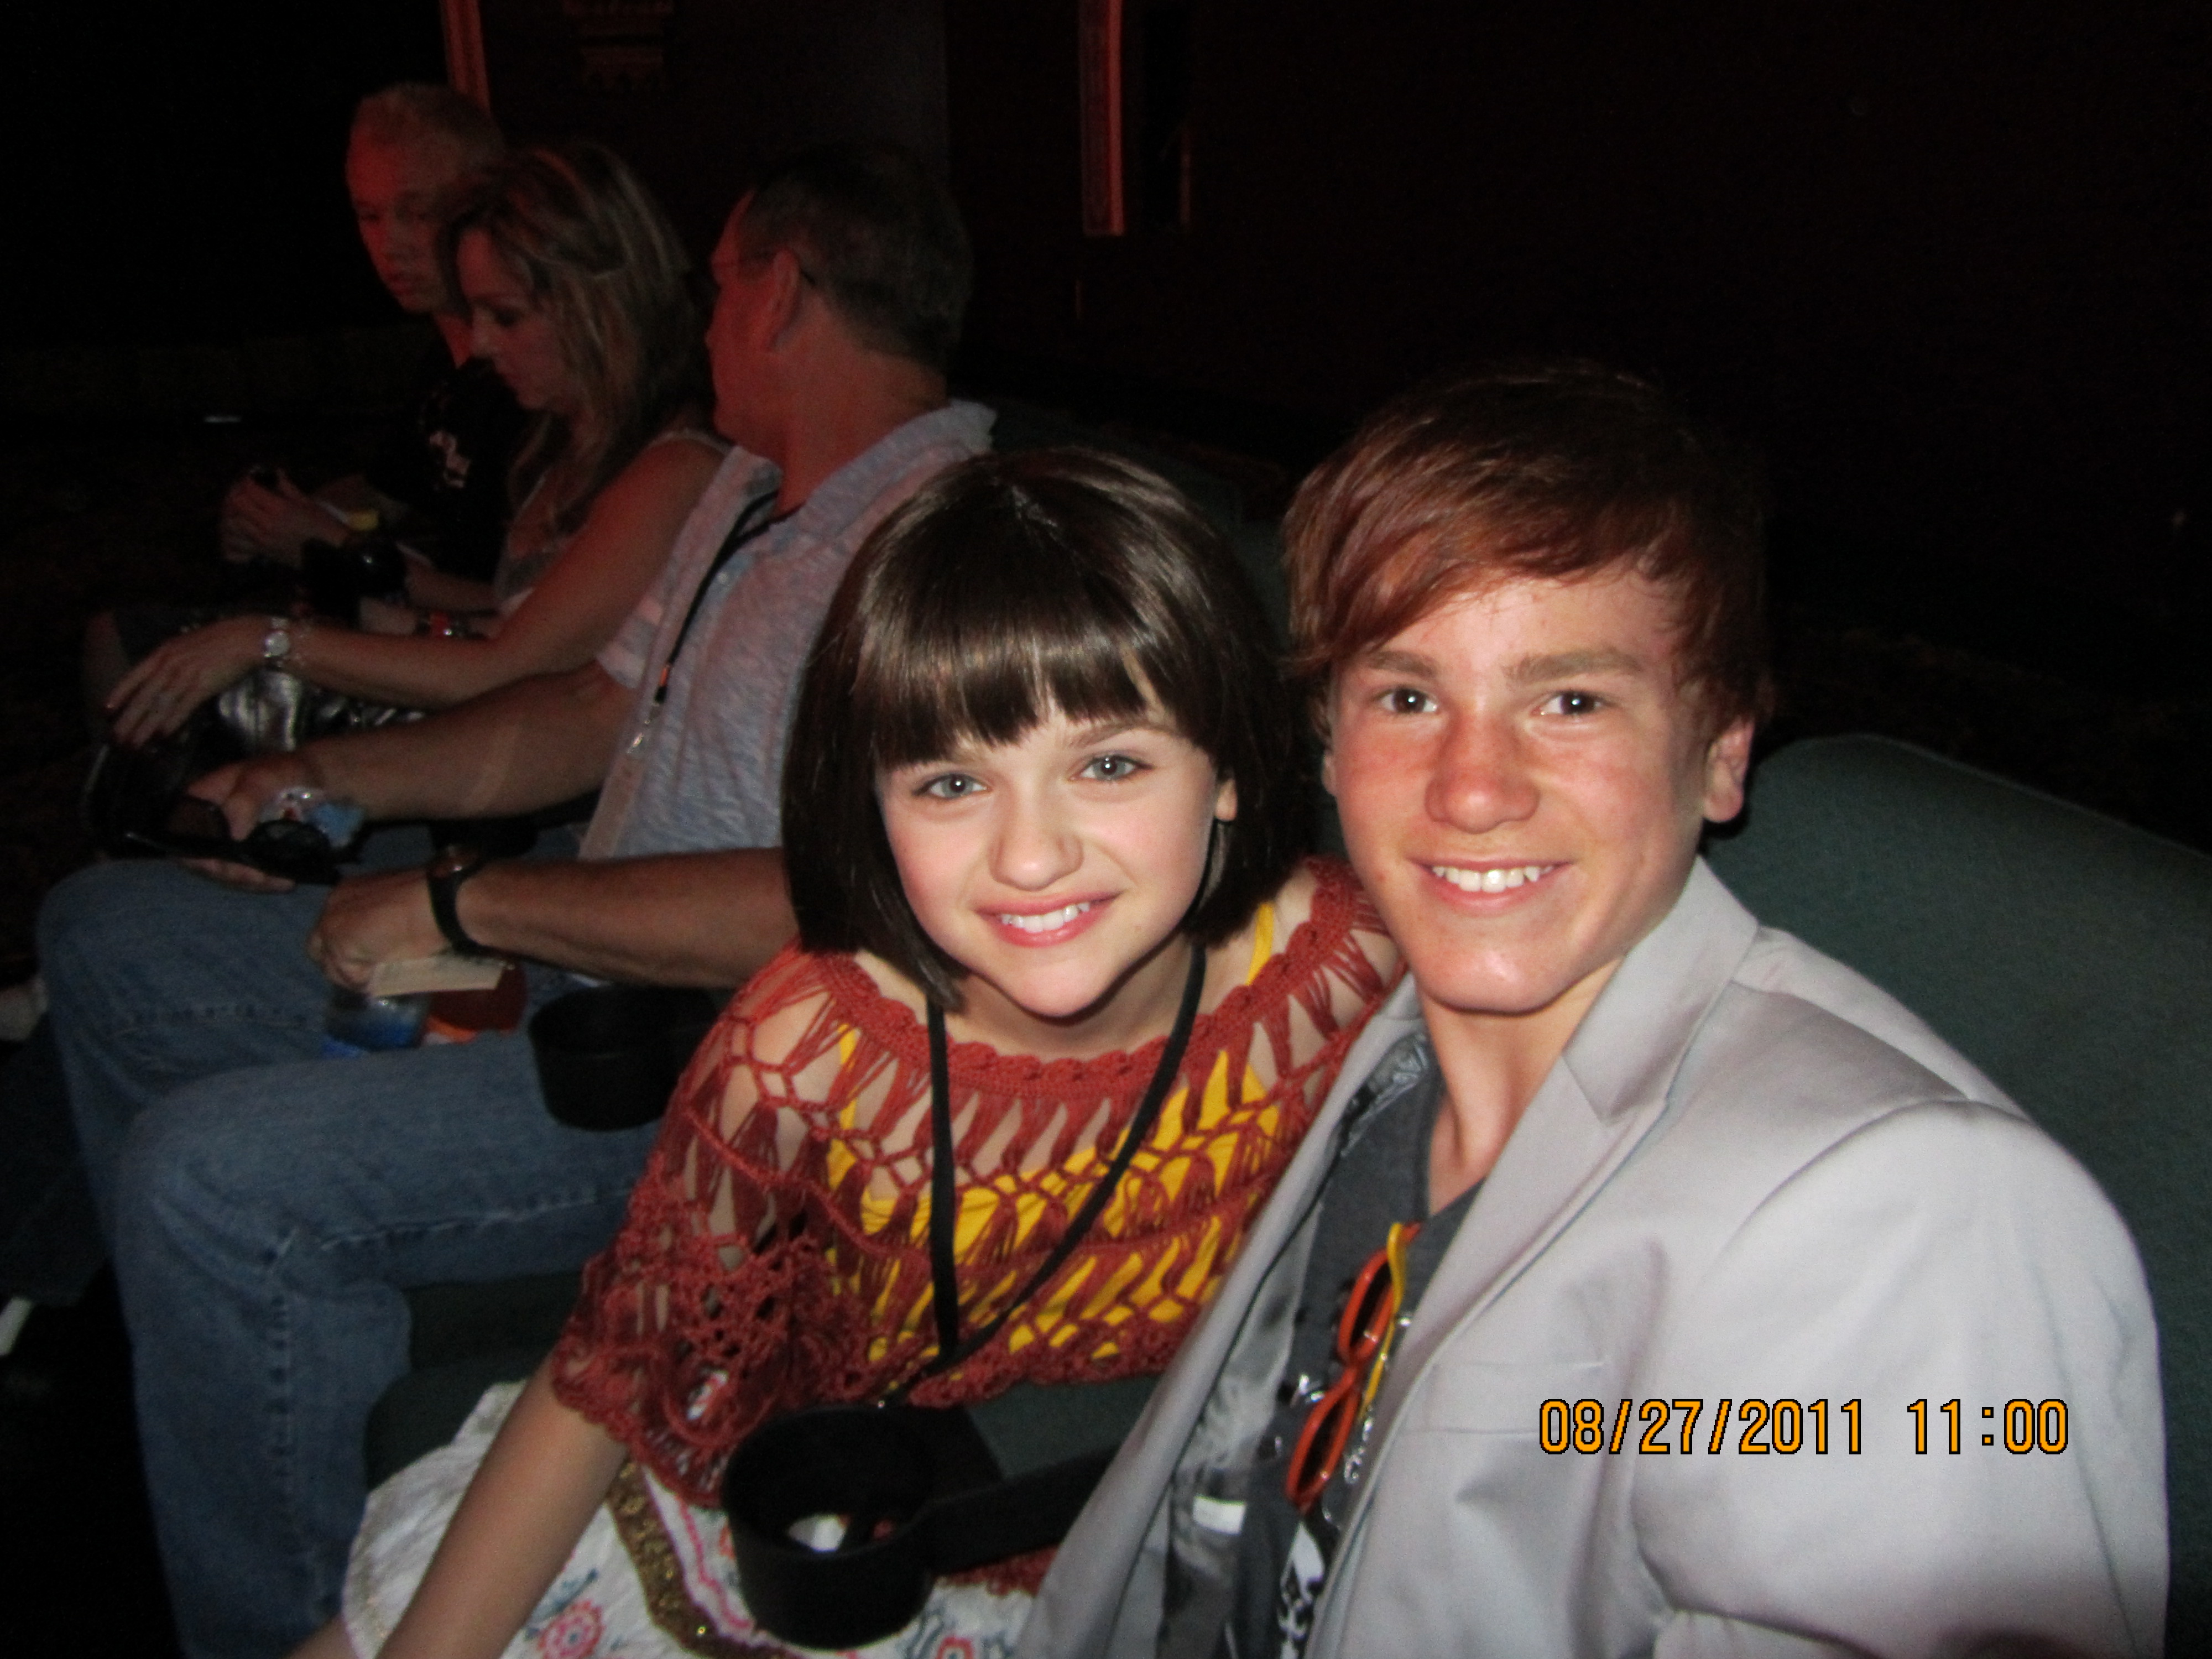 Justin Tinucci and Joey King at the Lion King 3d premiere at El Capitan, Hollywood September 2011